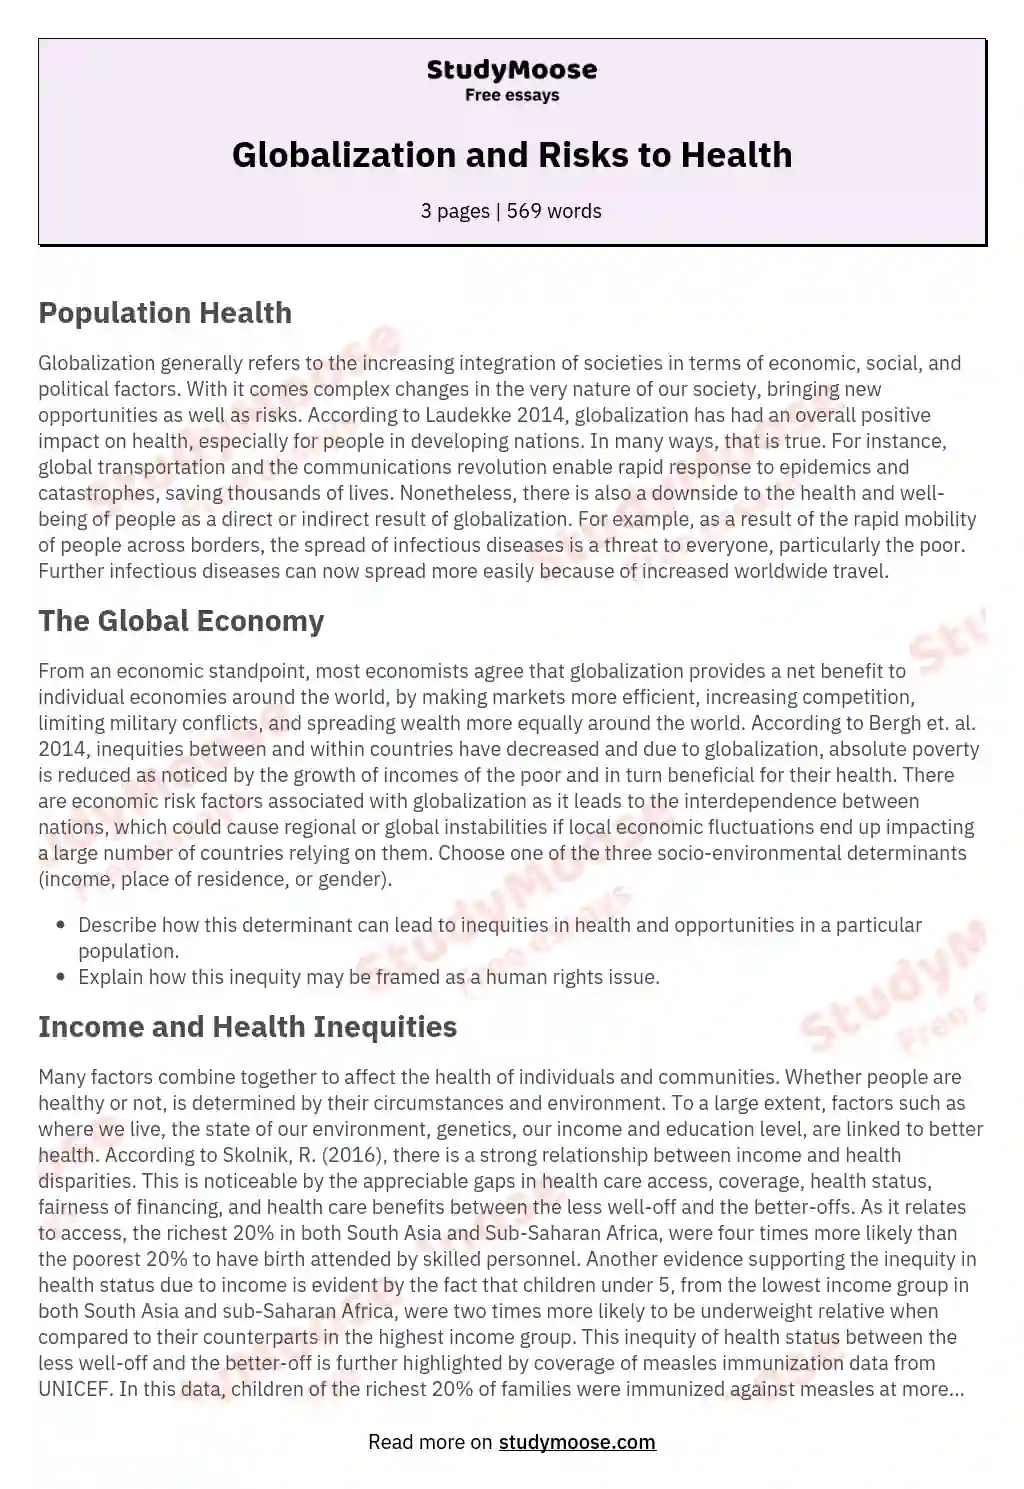 Globalization and Risks to Health essay